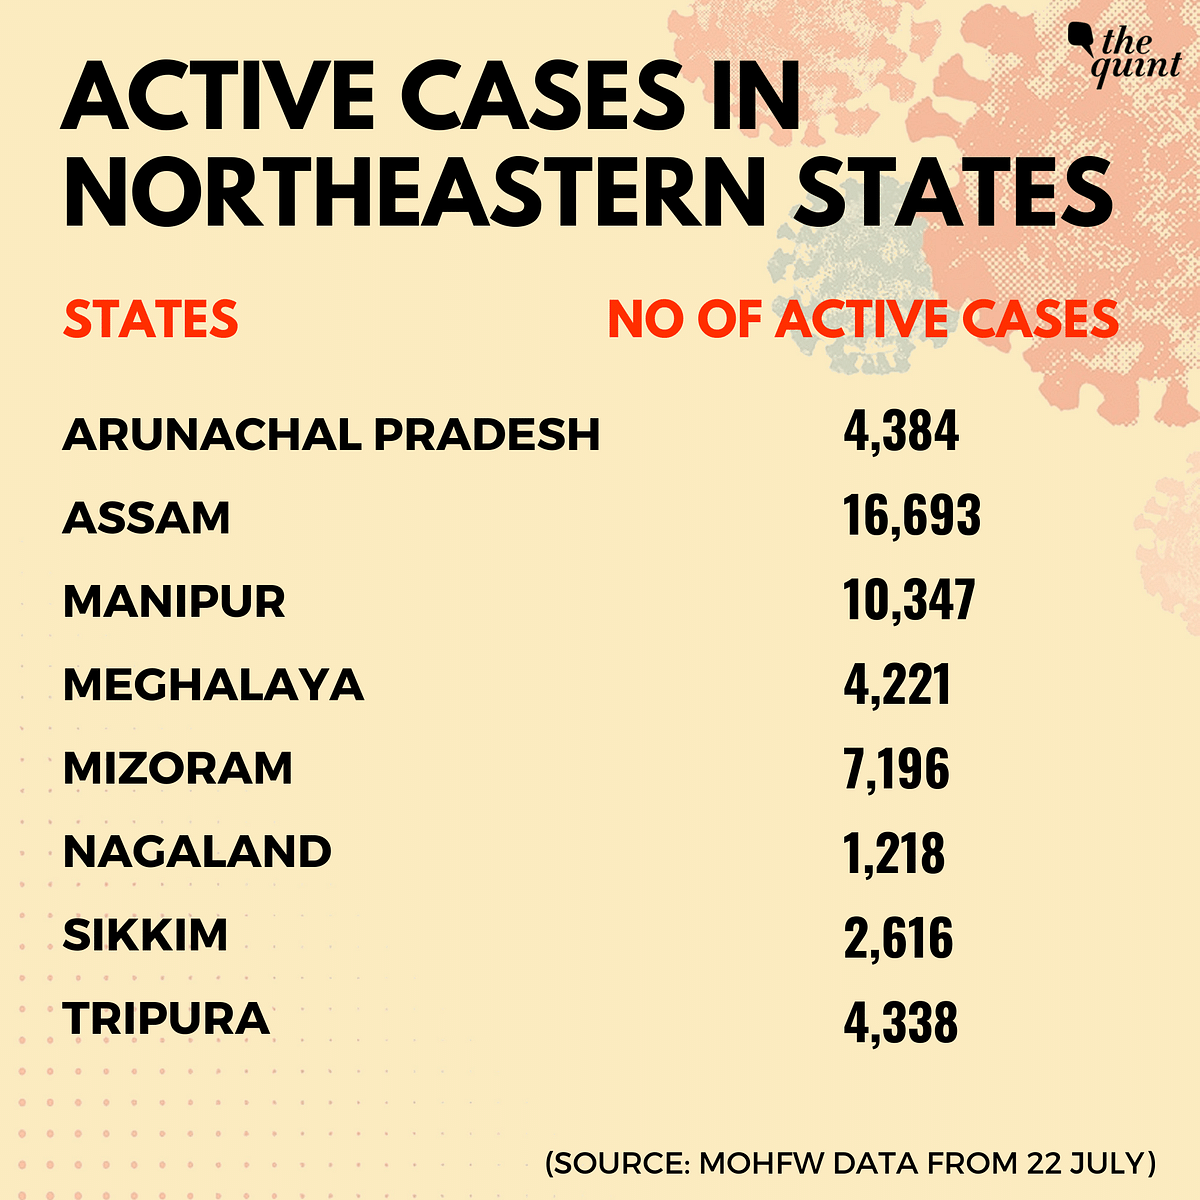 47 districts in India, a majority of which are from the northeastern states have a positivity rate above 10 percent.